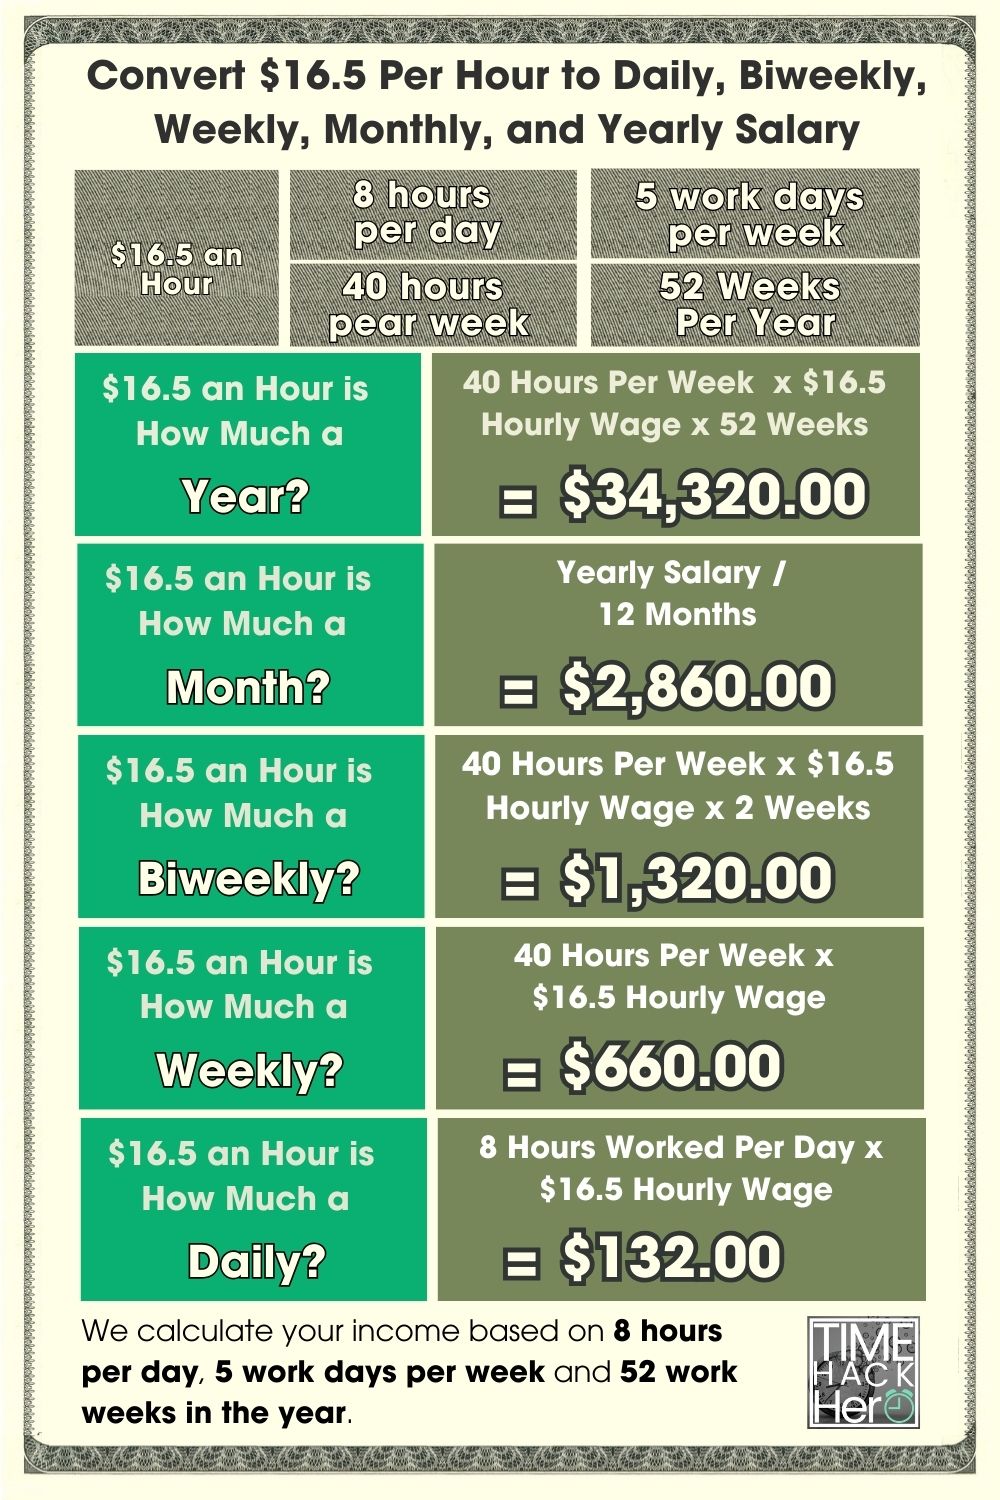 Convert $16.5 Per Hour to Daily, Biweekly, Weekly, Monthly, and Yearly Salary